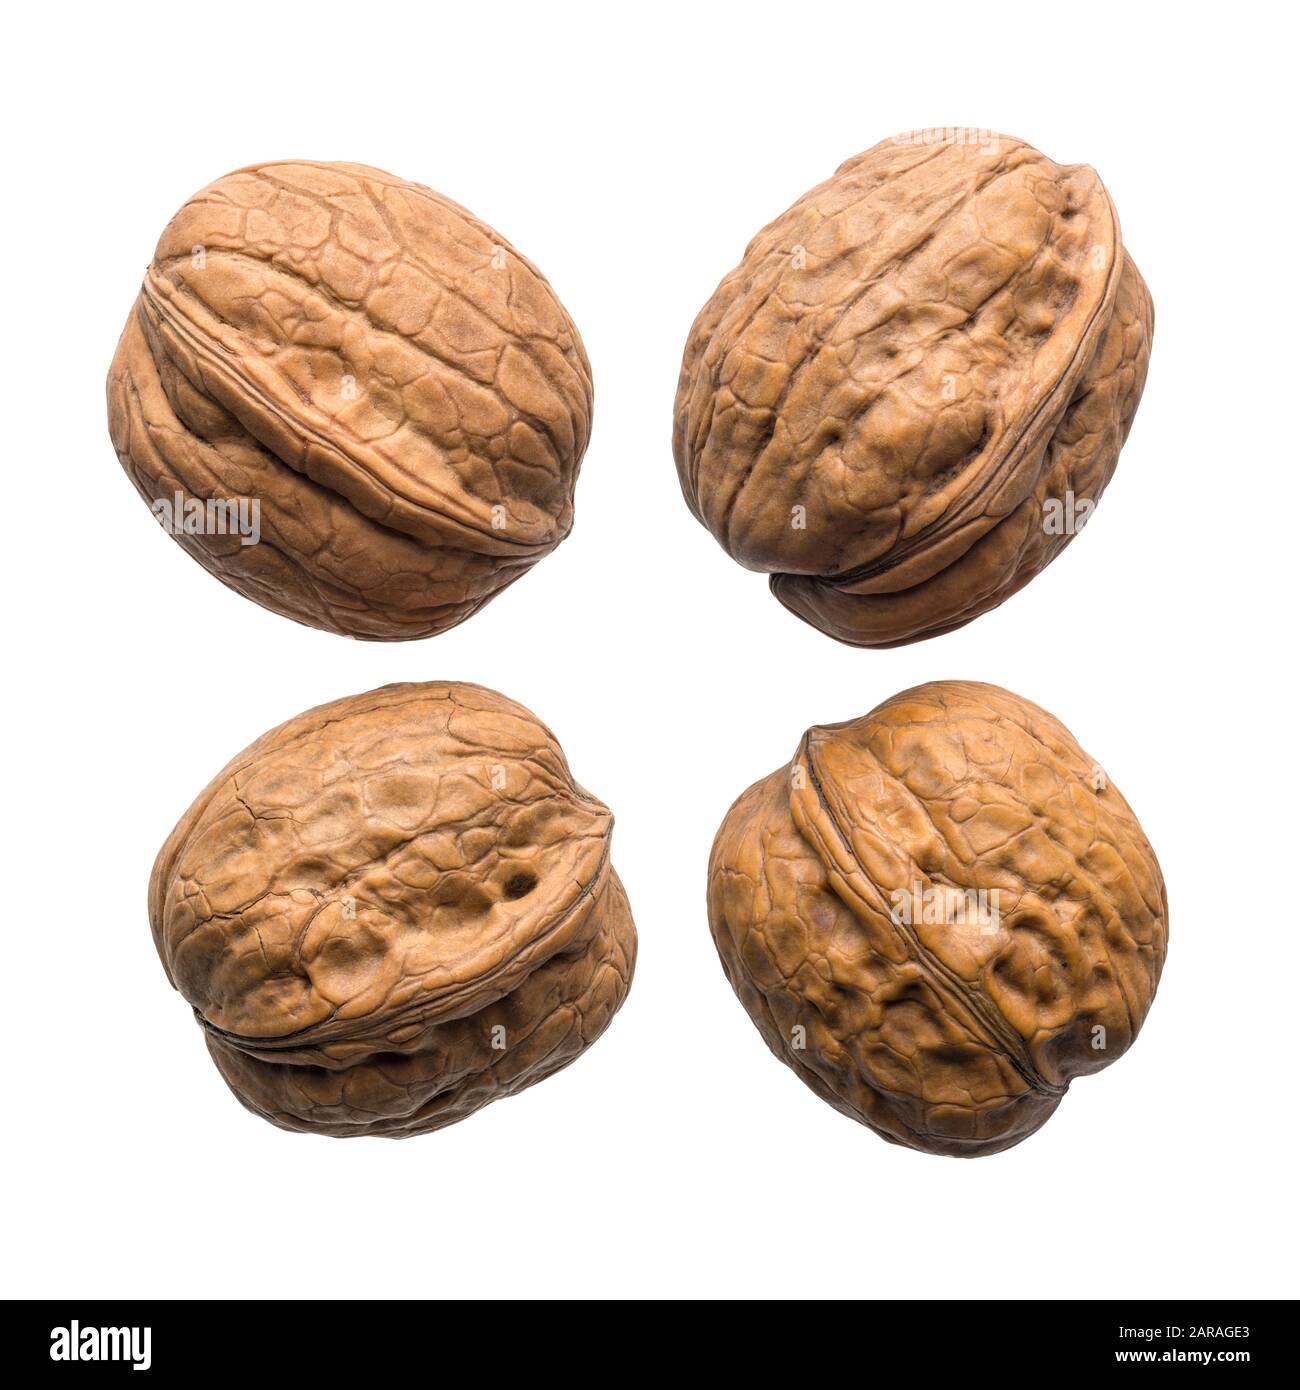 Food and drinks: group of unpeeled walnuts isolated on white background Stock Photo